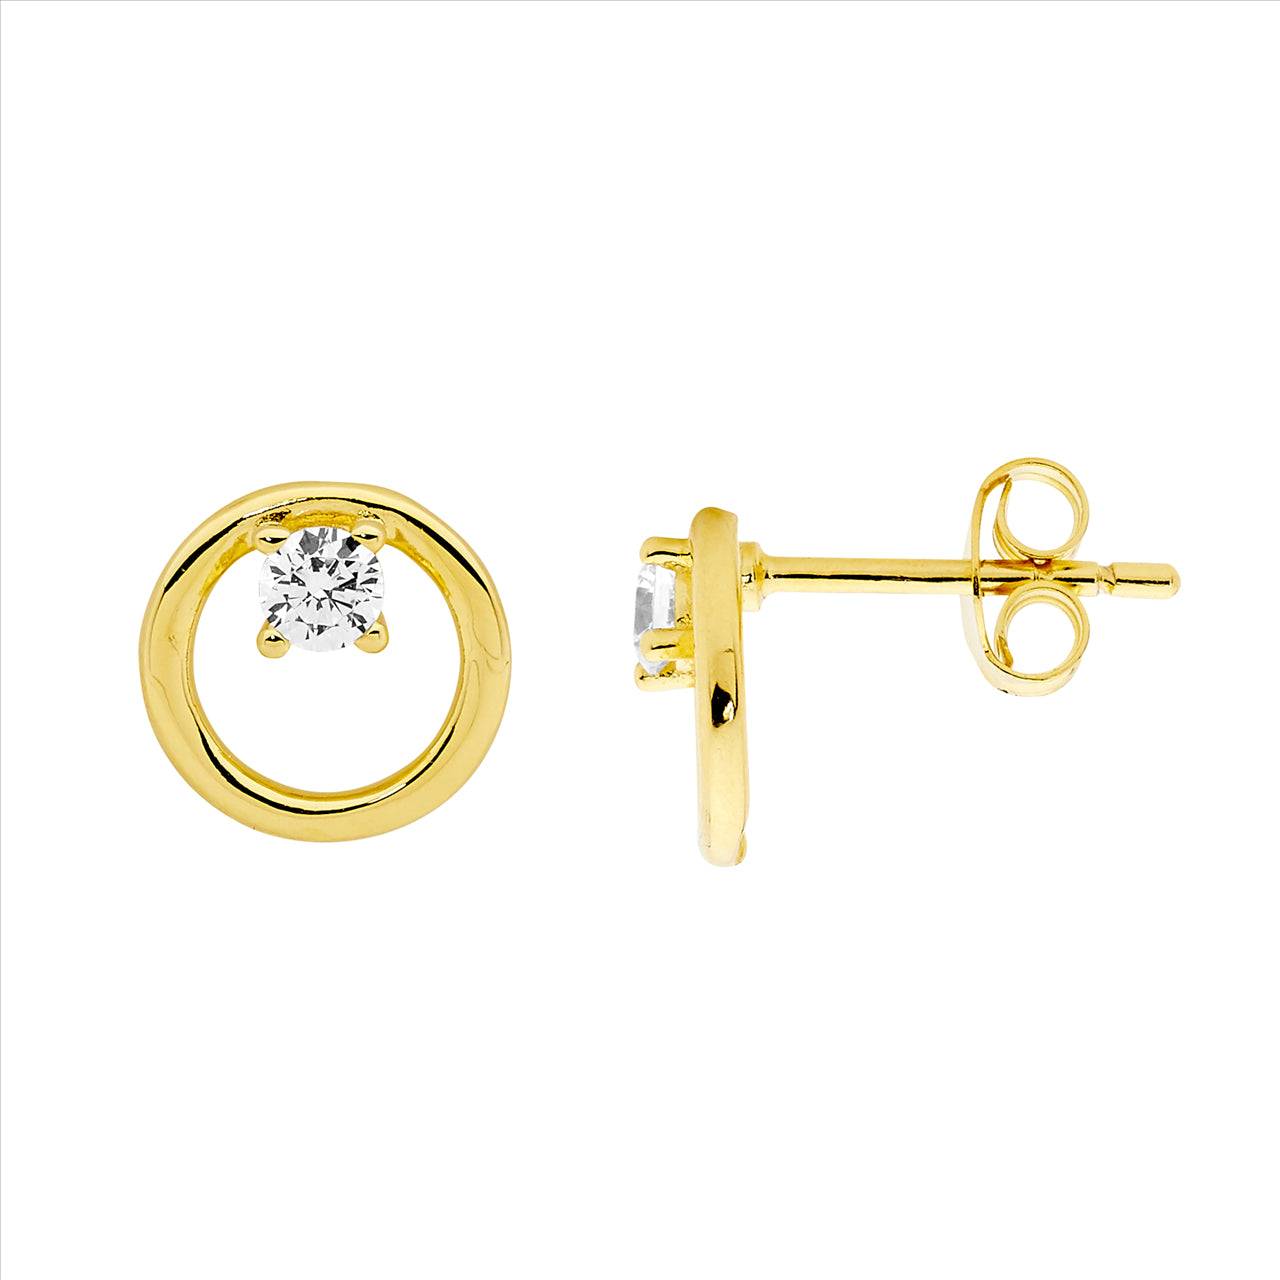 SS 9mm open circle earrings w/WH CZ & gold plating